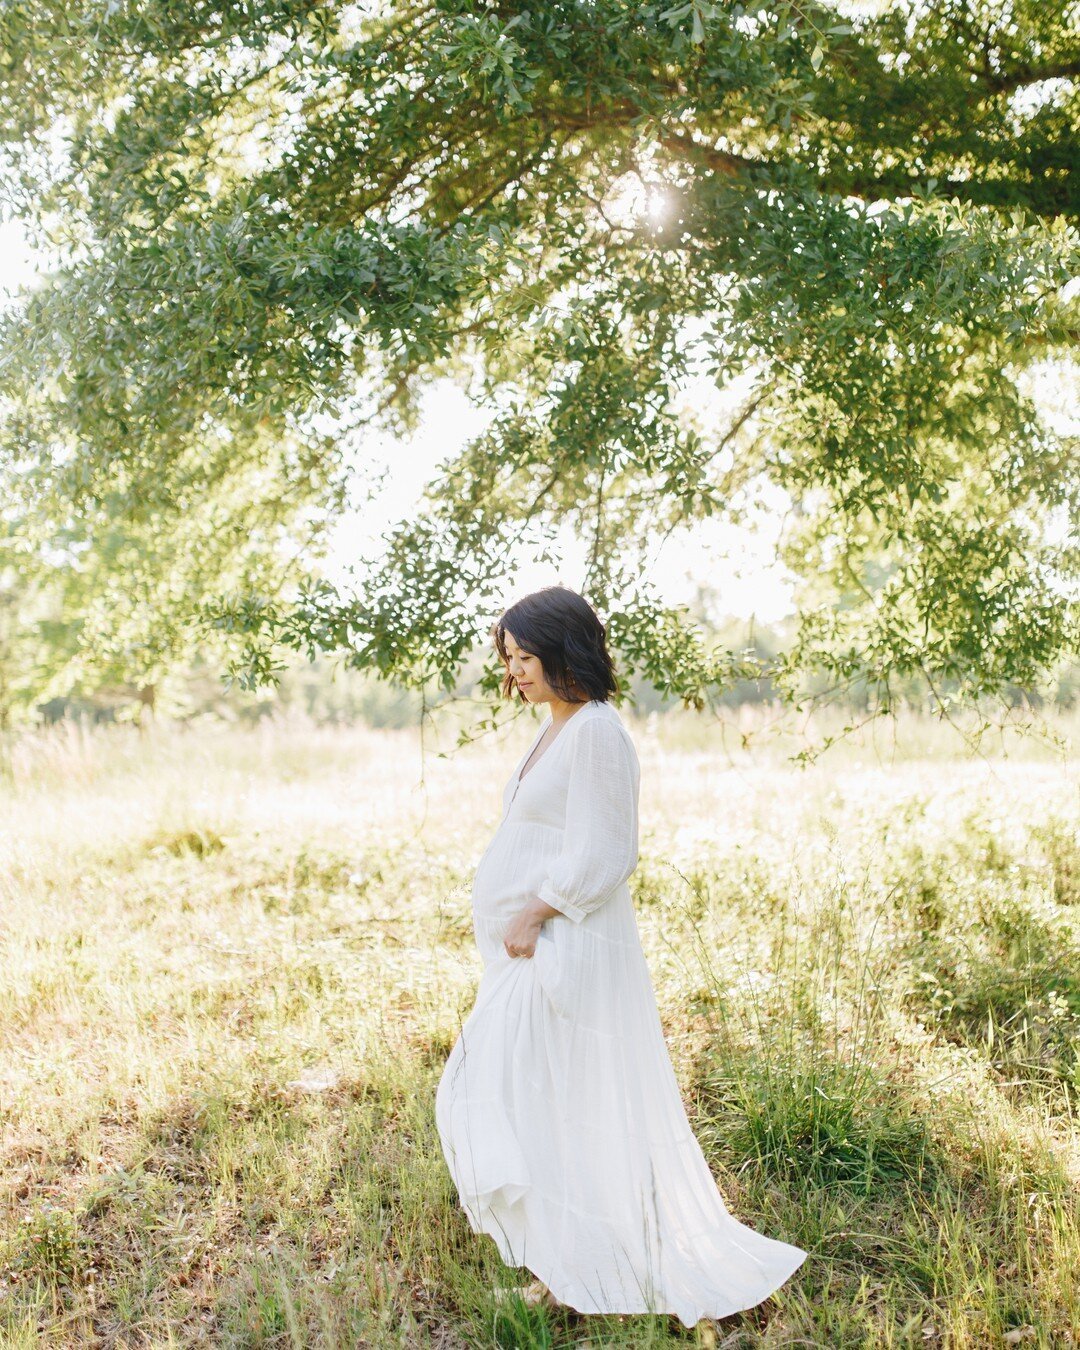 the beautiful moments before ✨ y o u ✨ | maternity session​​​​​​​​
​​​​​​​​
​​​​​​​​
#newbornphotography #shannonjeancolephoto #maternitysession #atlantanewbornphotographer #peachtreecityphotograher #atlantamaternityphotographer #peachtreecitynewborn